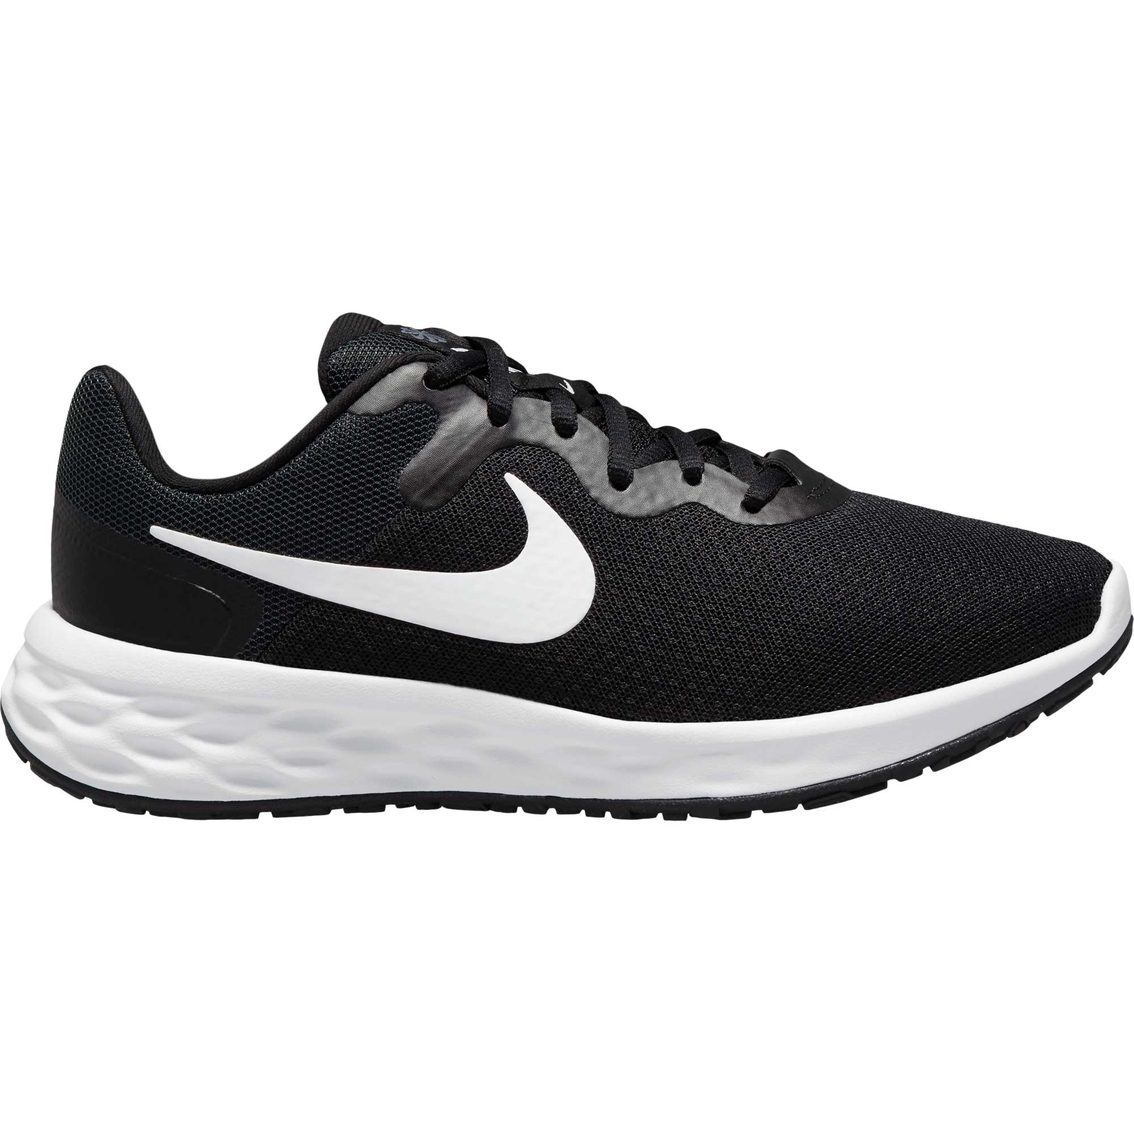 Nike Women's Revolution 6 Running Shoes | Women's Athletic Shoes ...